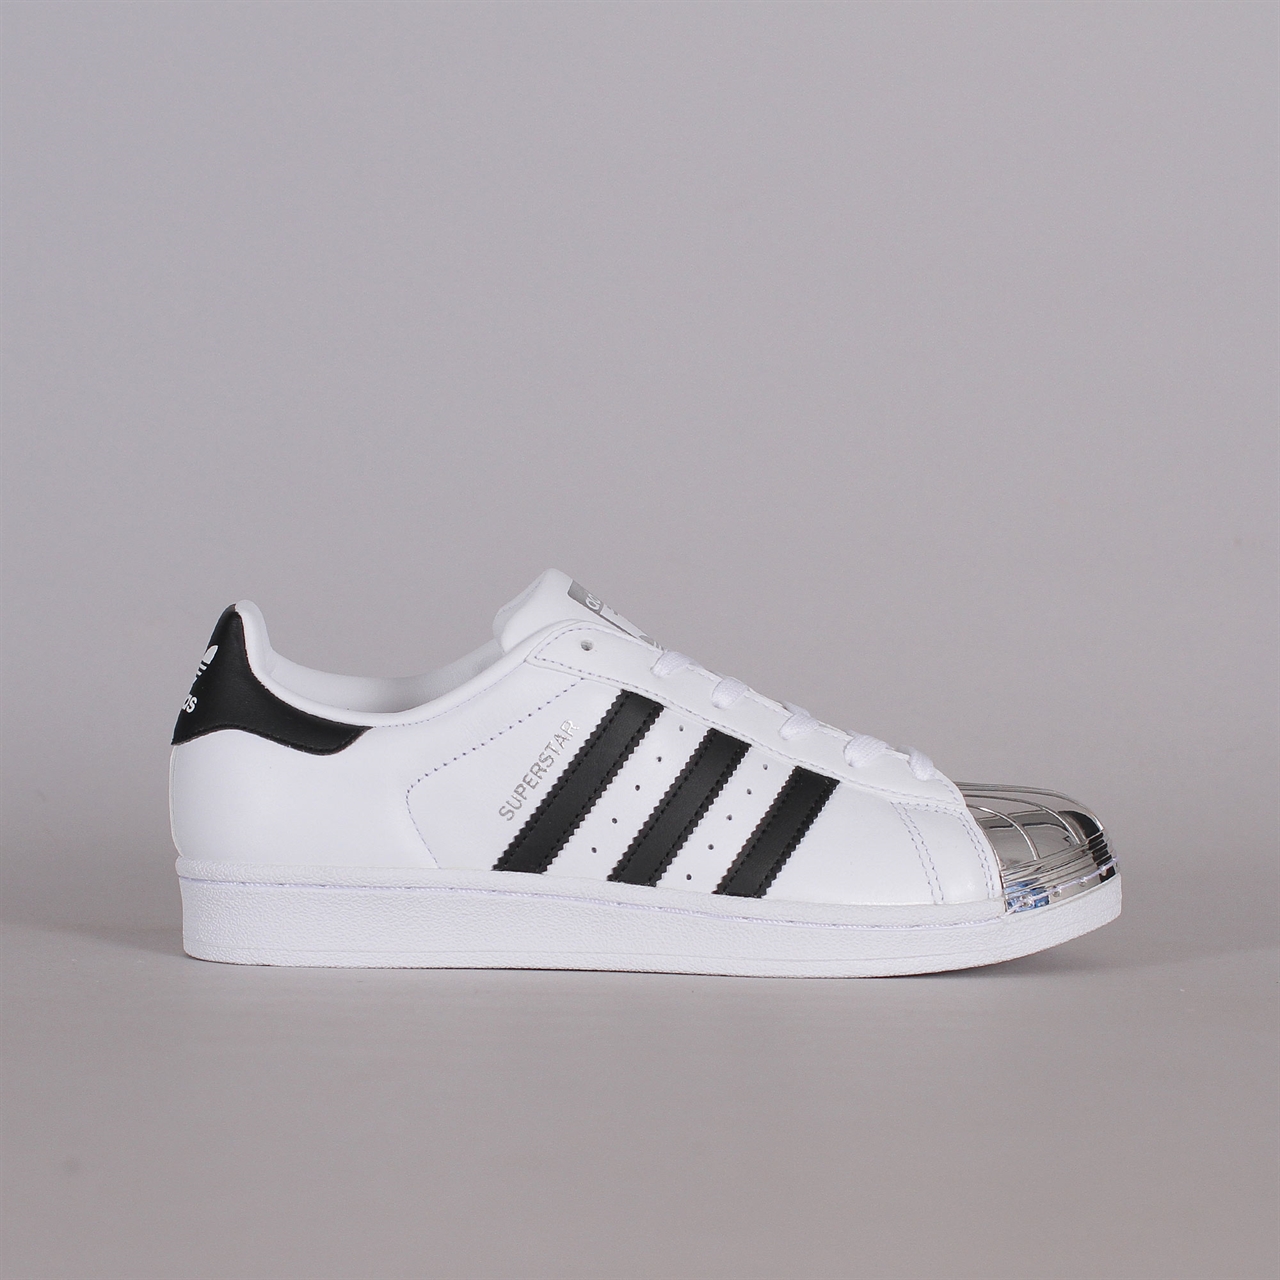 adidas superstar 80s metal toe Or homme